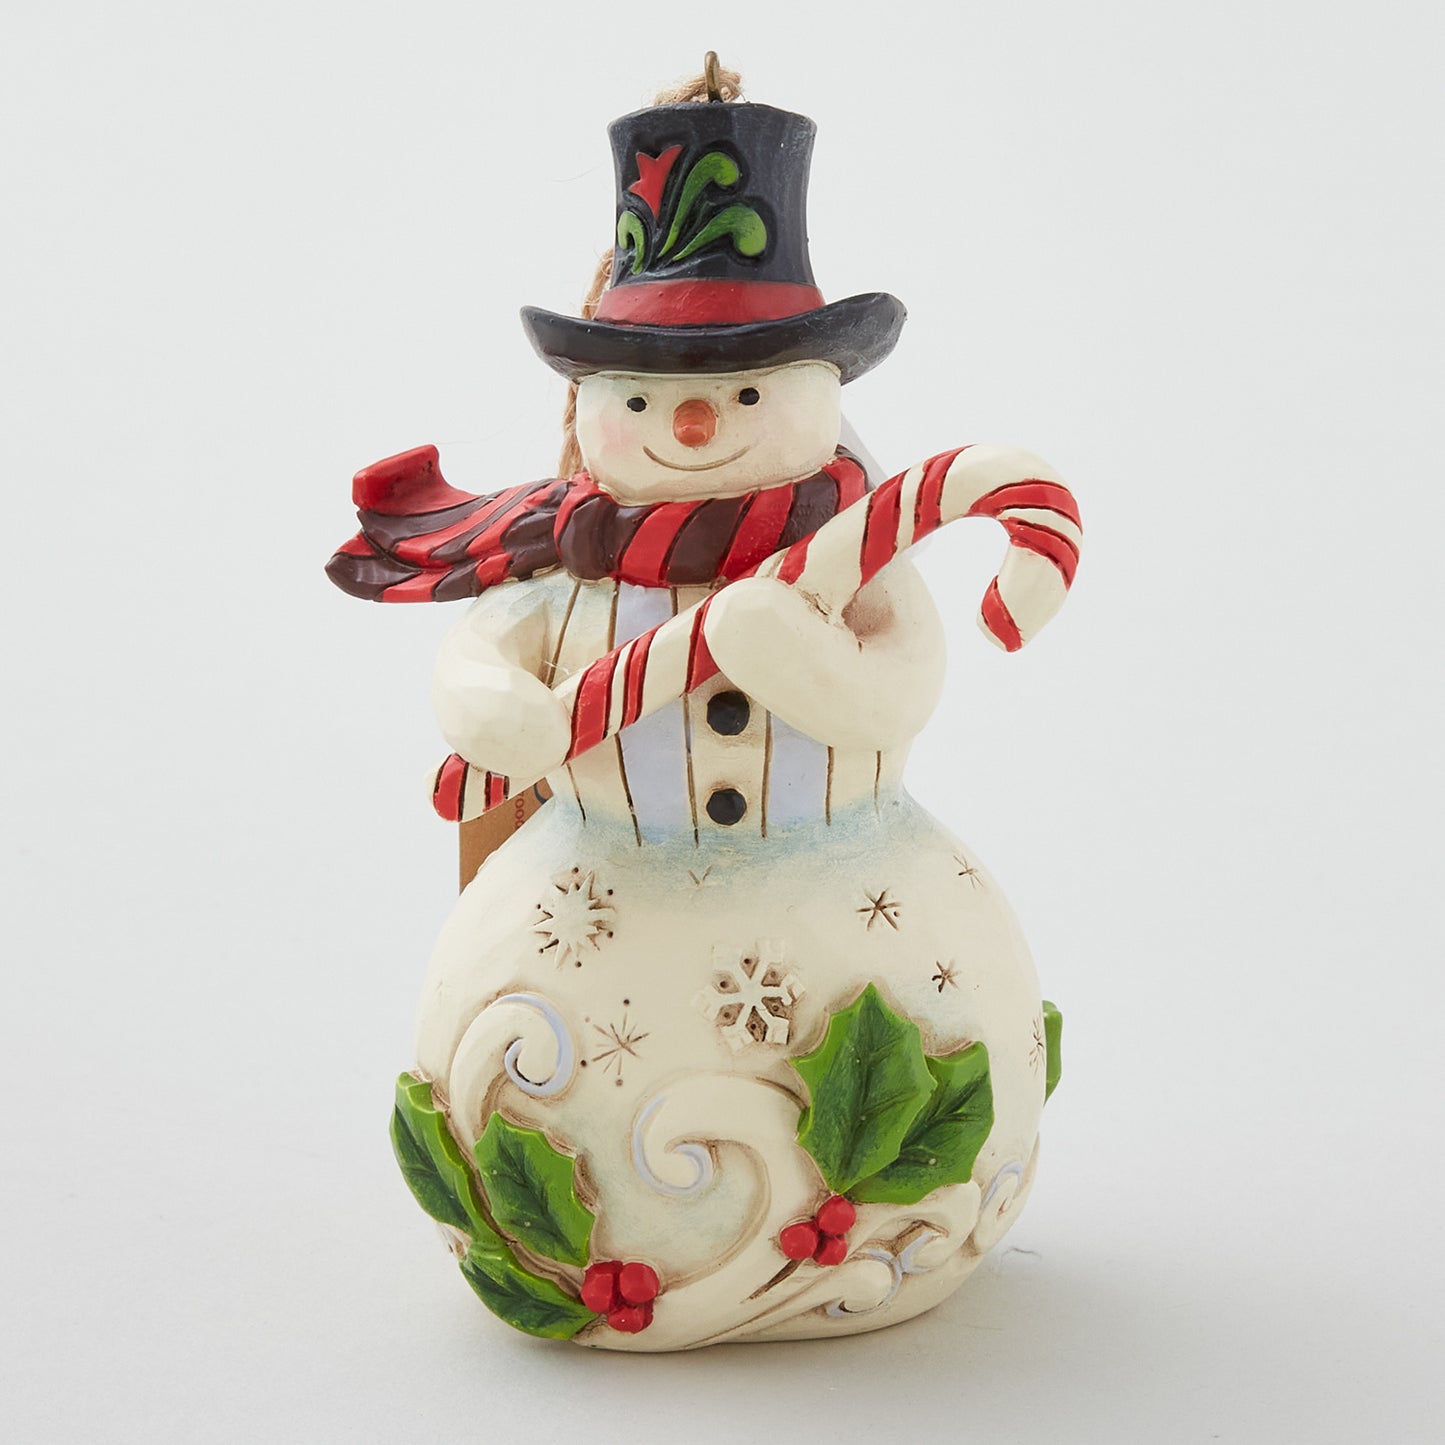 Jim Shore Heartwood Creek Snowman with Candy Cane Ornament Primary Image